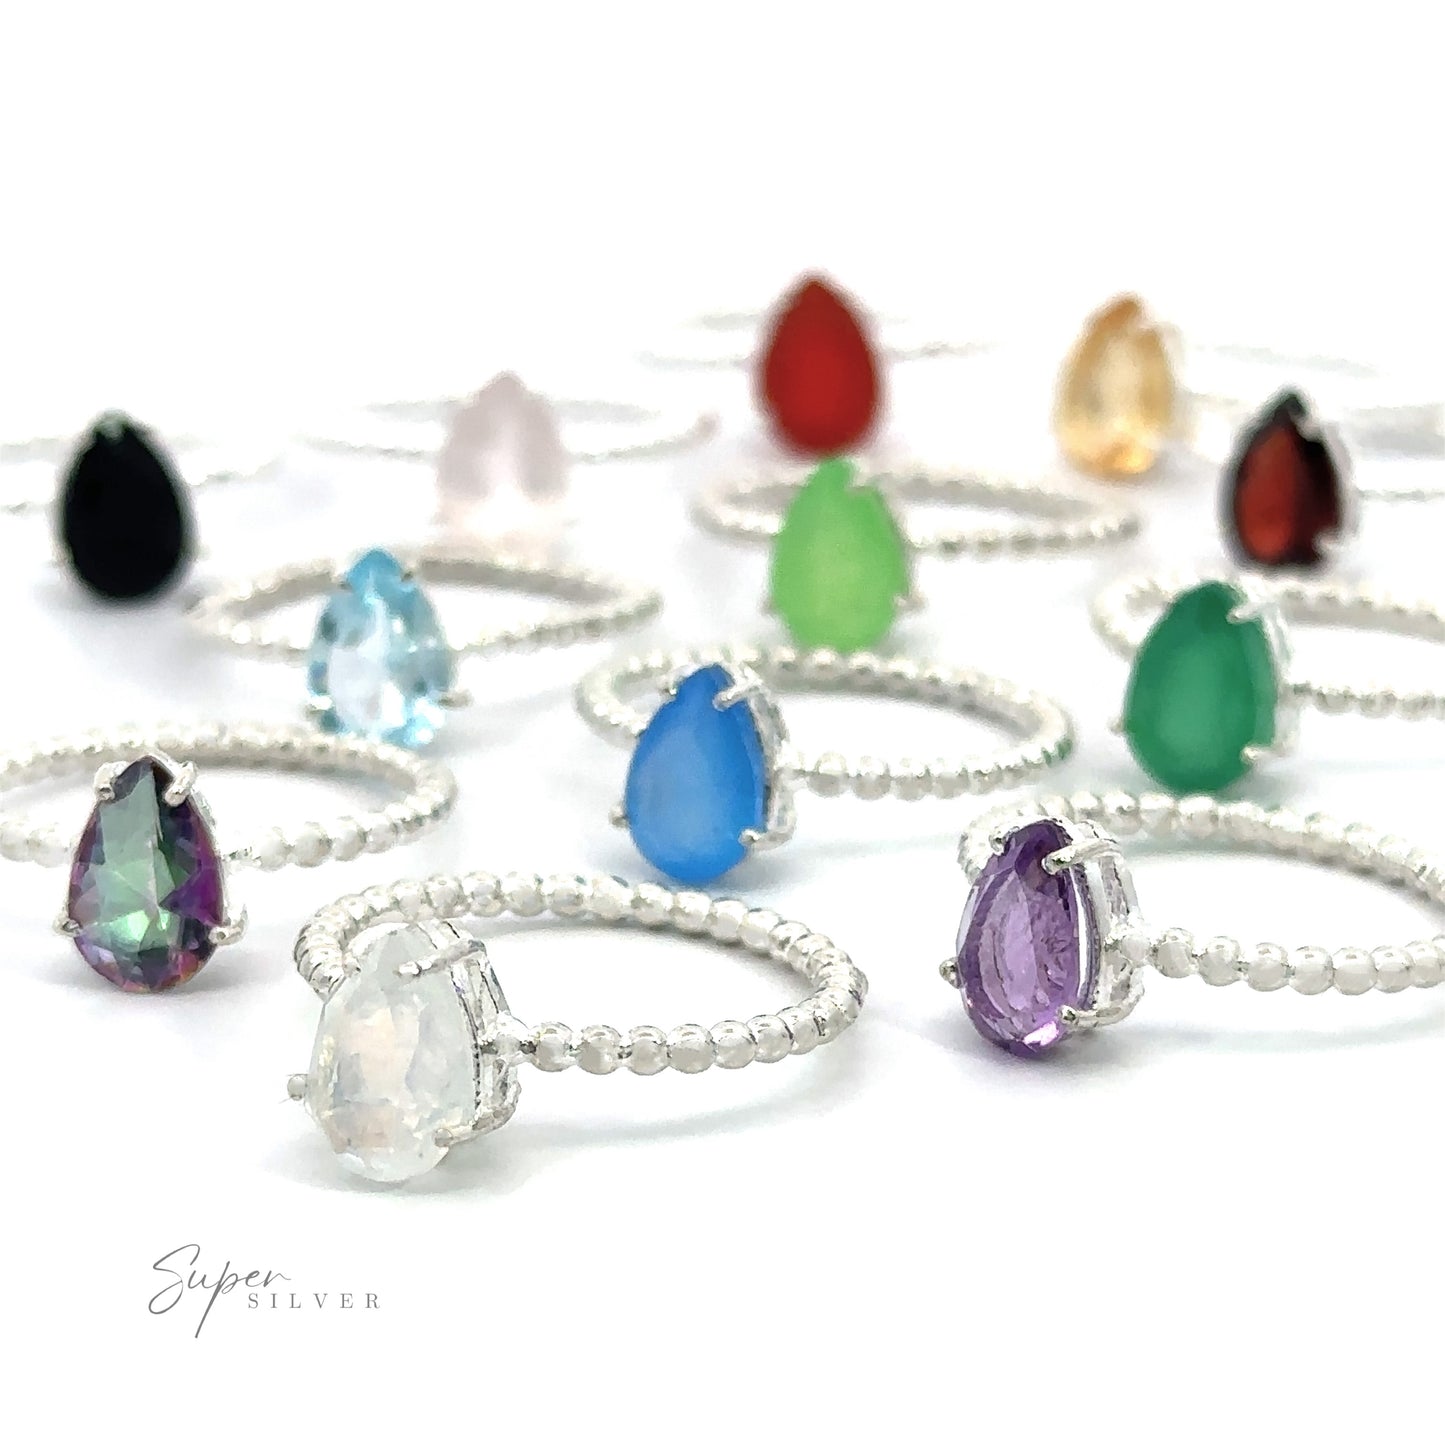 Assortment of Vibrant Teardrop Gemstone Rings with Beaded Bands in prong settings on a white surface.